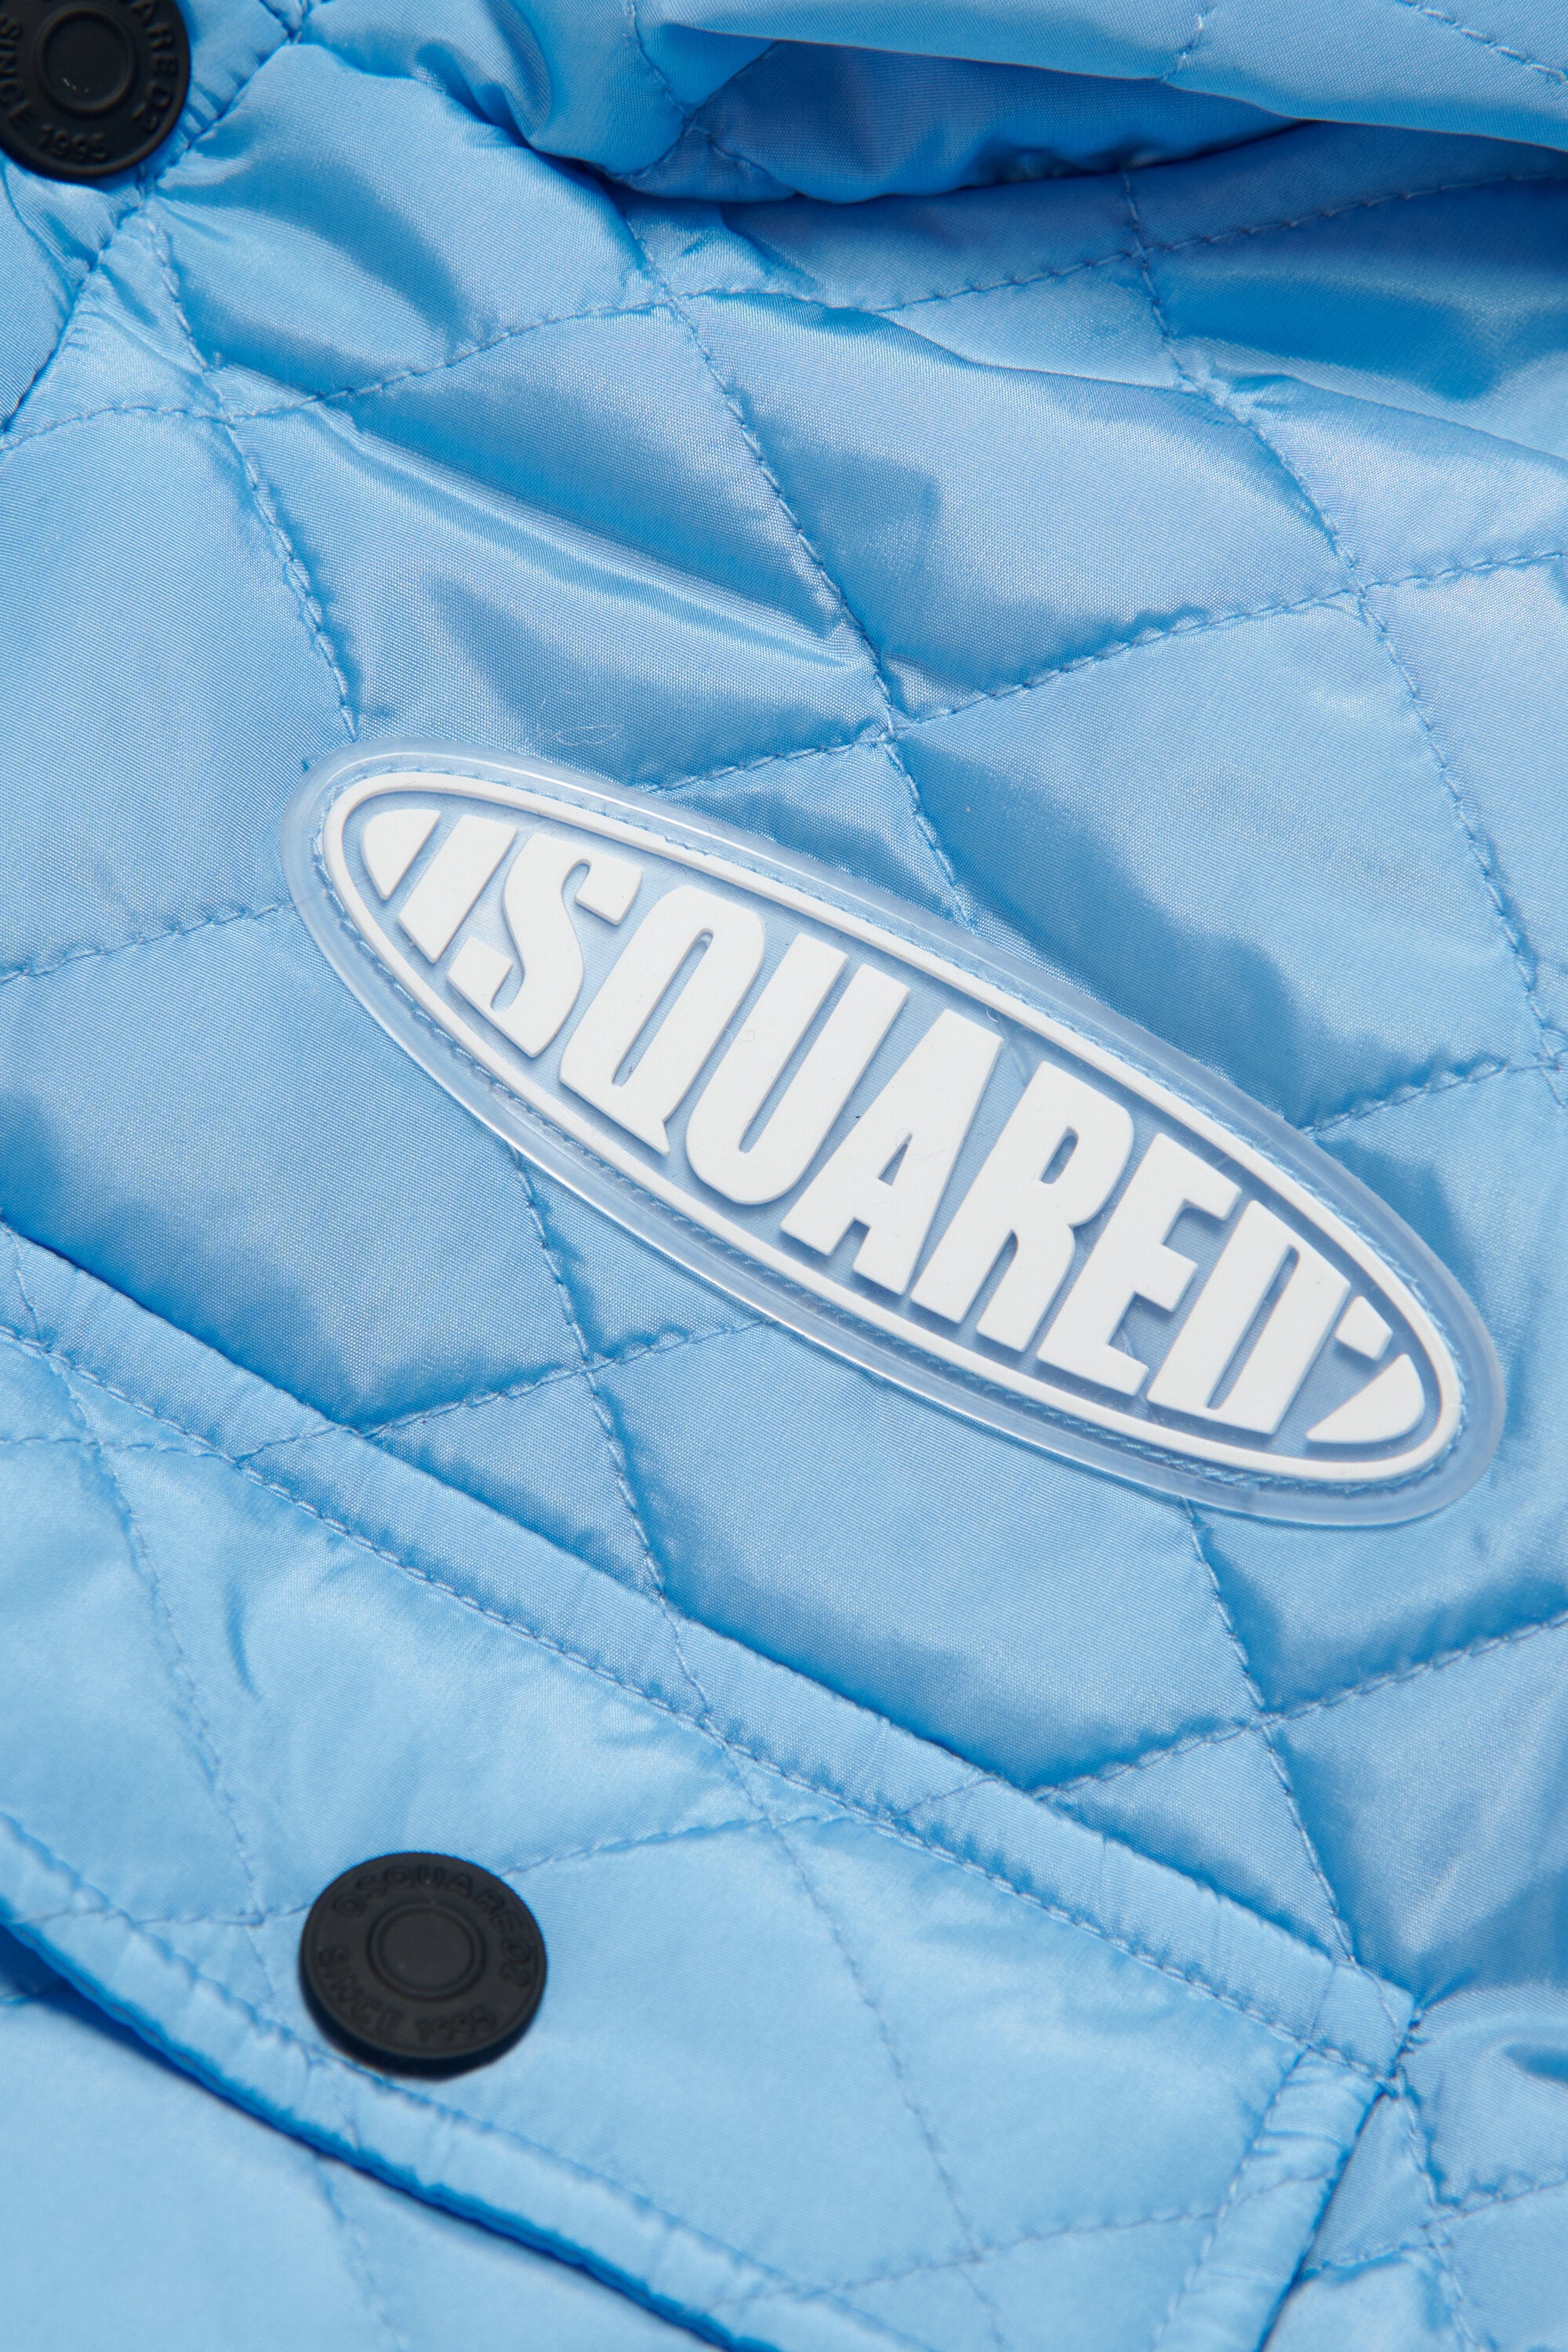 Sleeveless padded jacket branded with surf logo patch